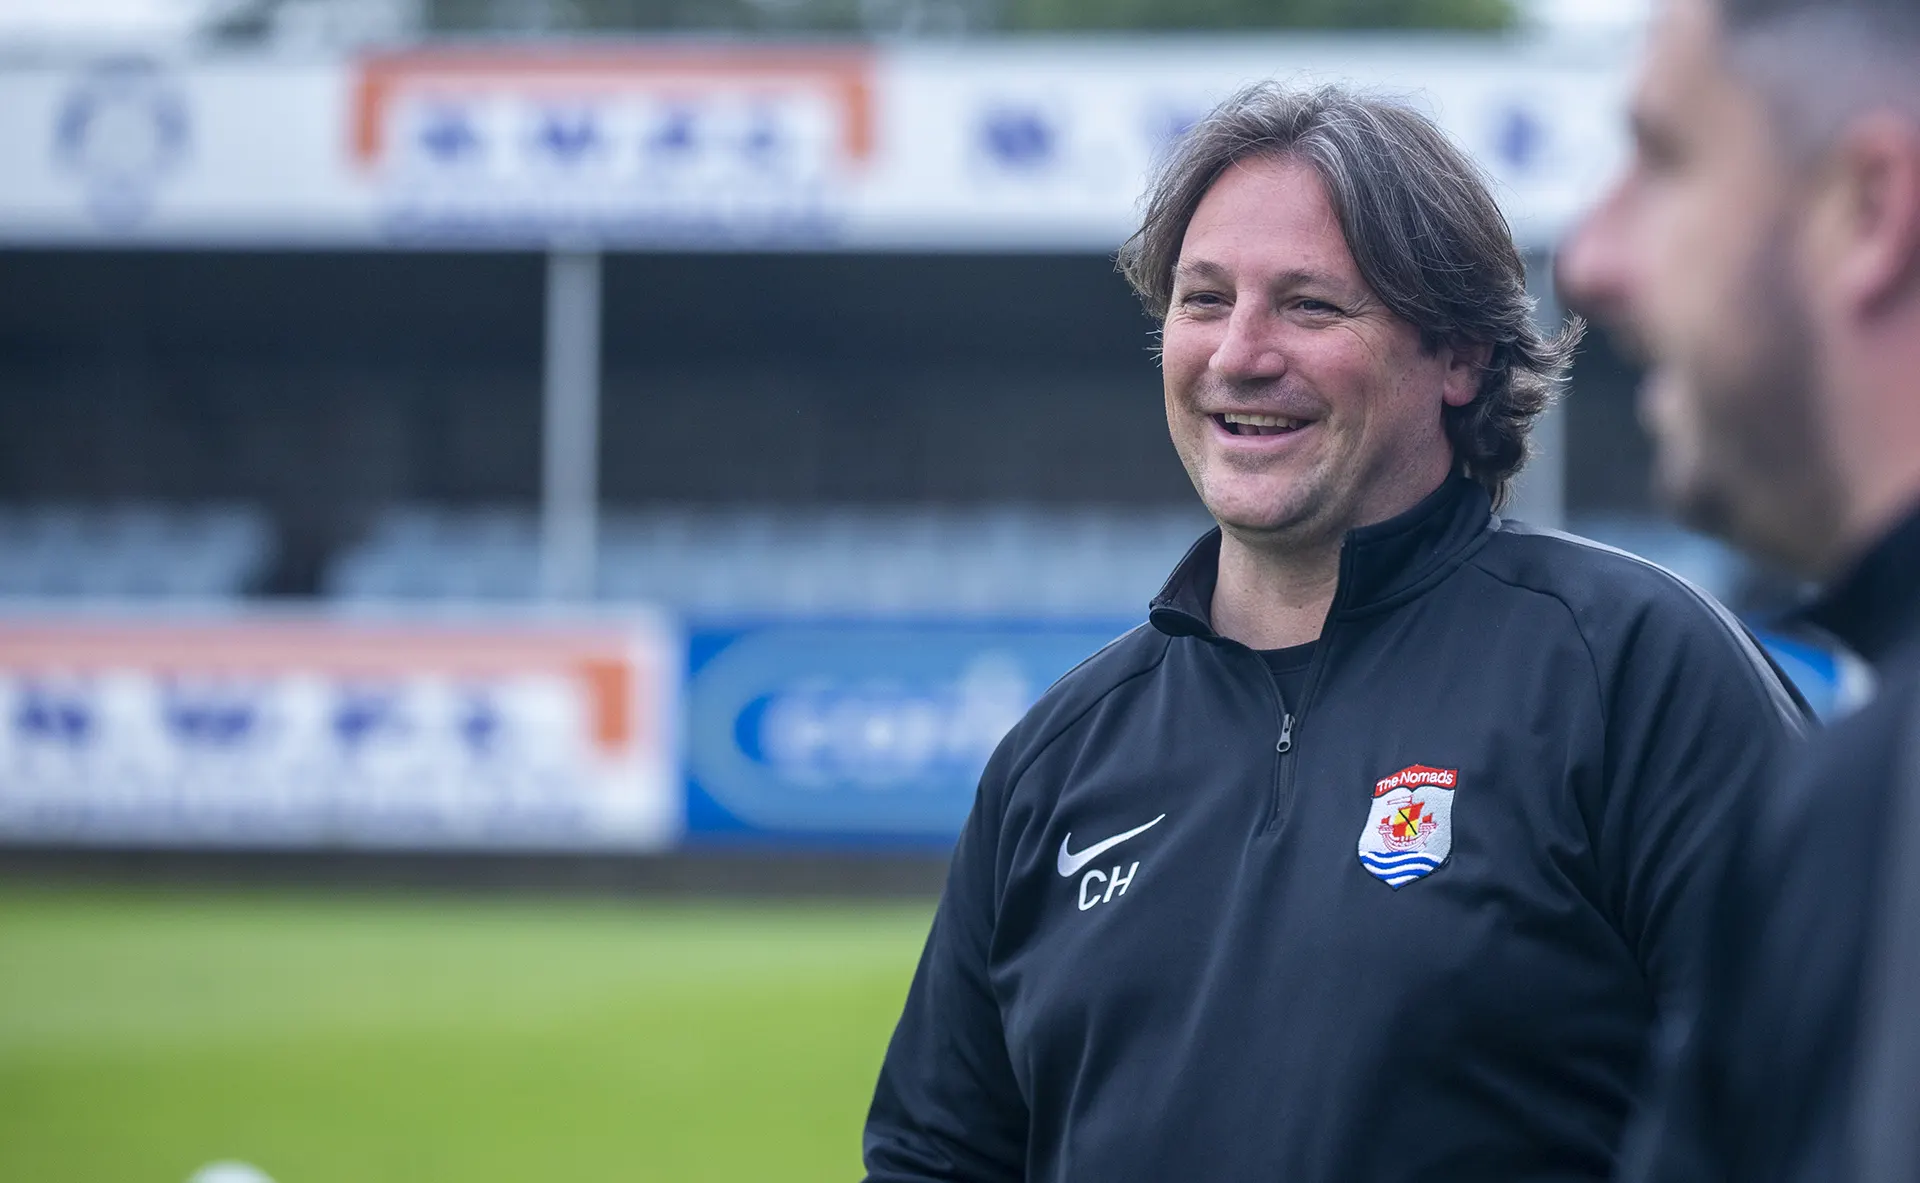 Craig Harrison has been appointed Connah’s Quay Nomads' new Head Coach © NCM Media